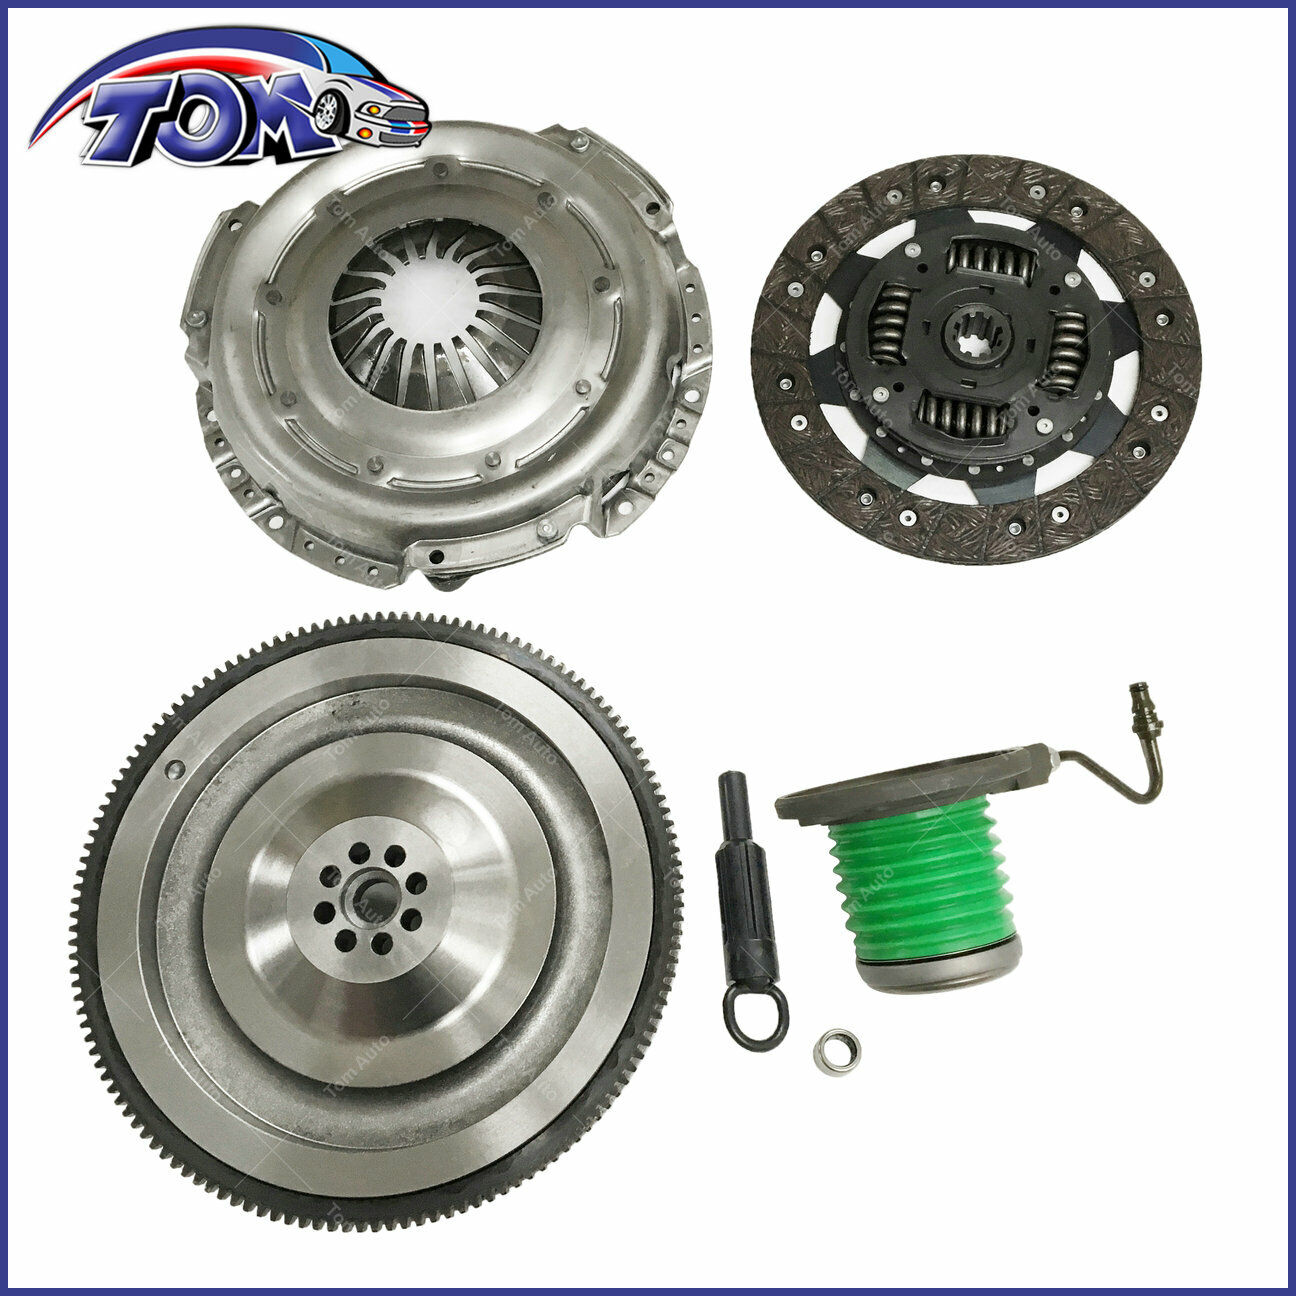  Clutch Kit Flywheel Slave Cylinder Bearing Unit For 05-10 Ford Mustang 4.0l 